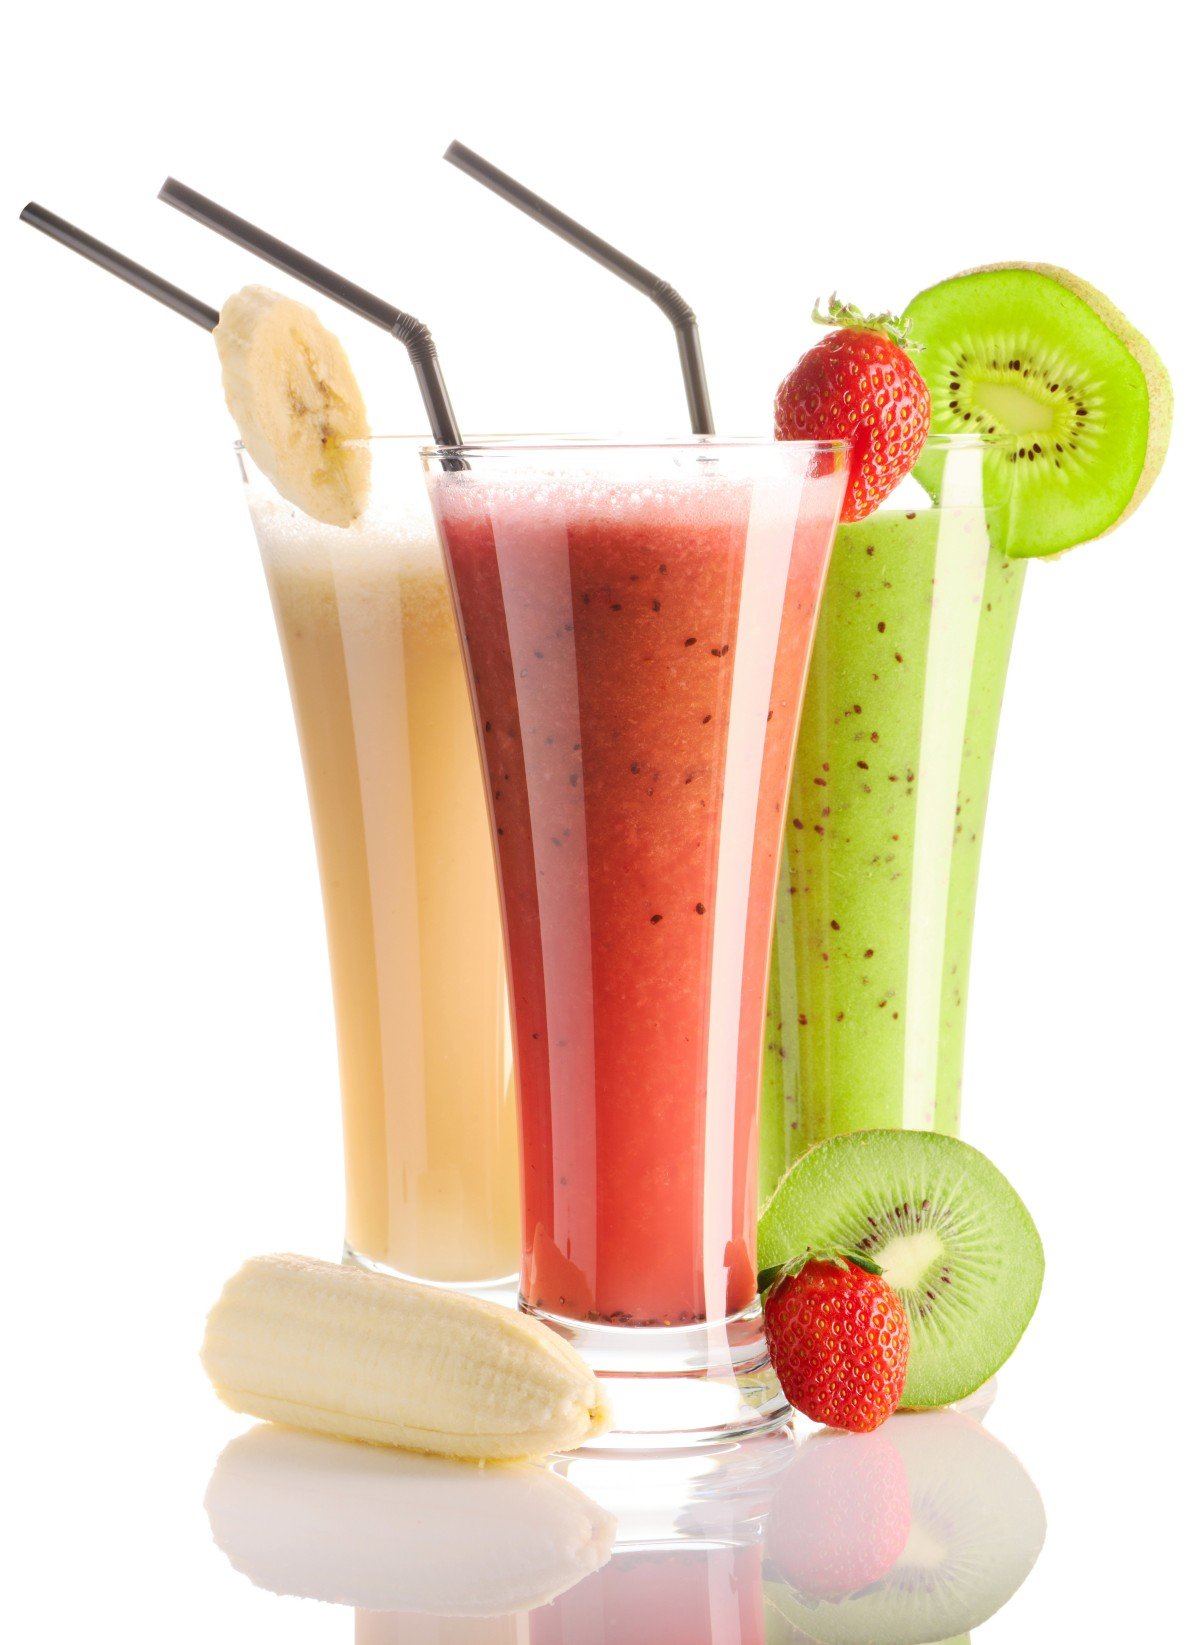 How can Smoothie help you lose weight?